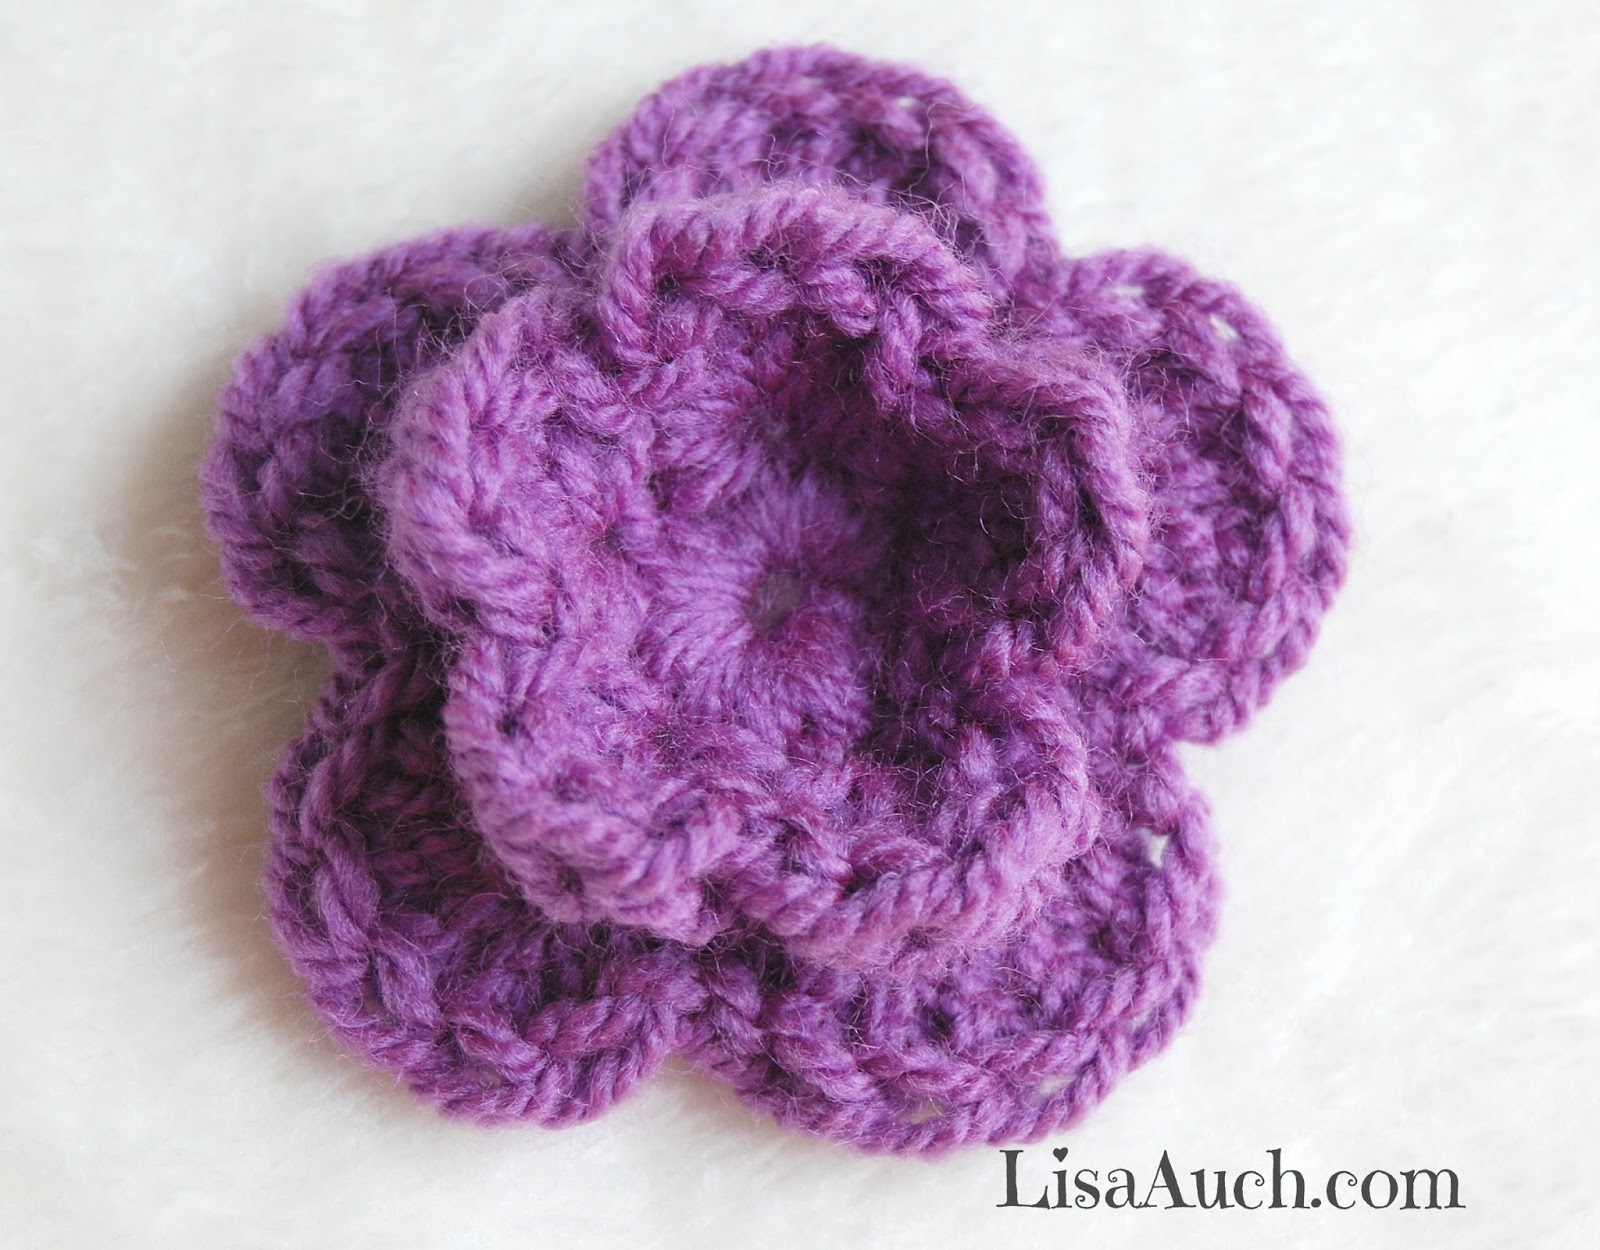 Crochet Flowers Pattern Free Crochet Patterns And Designs Lisaauch How To Crochet A